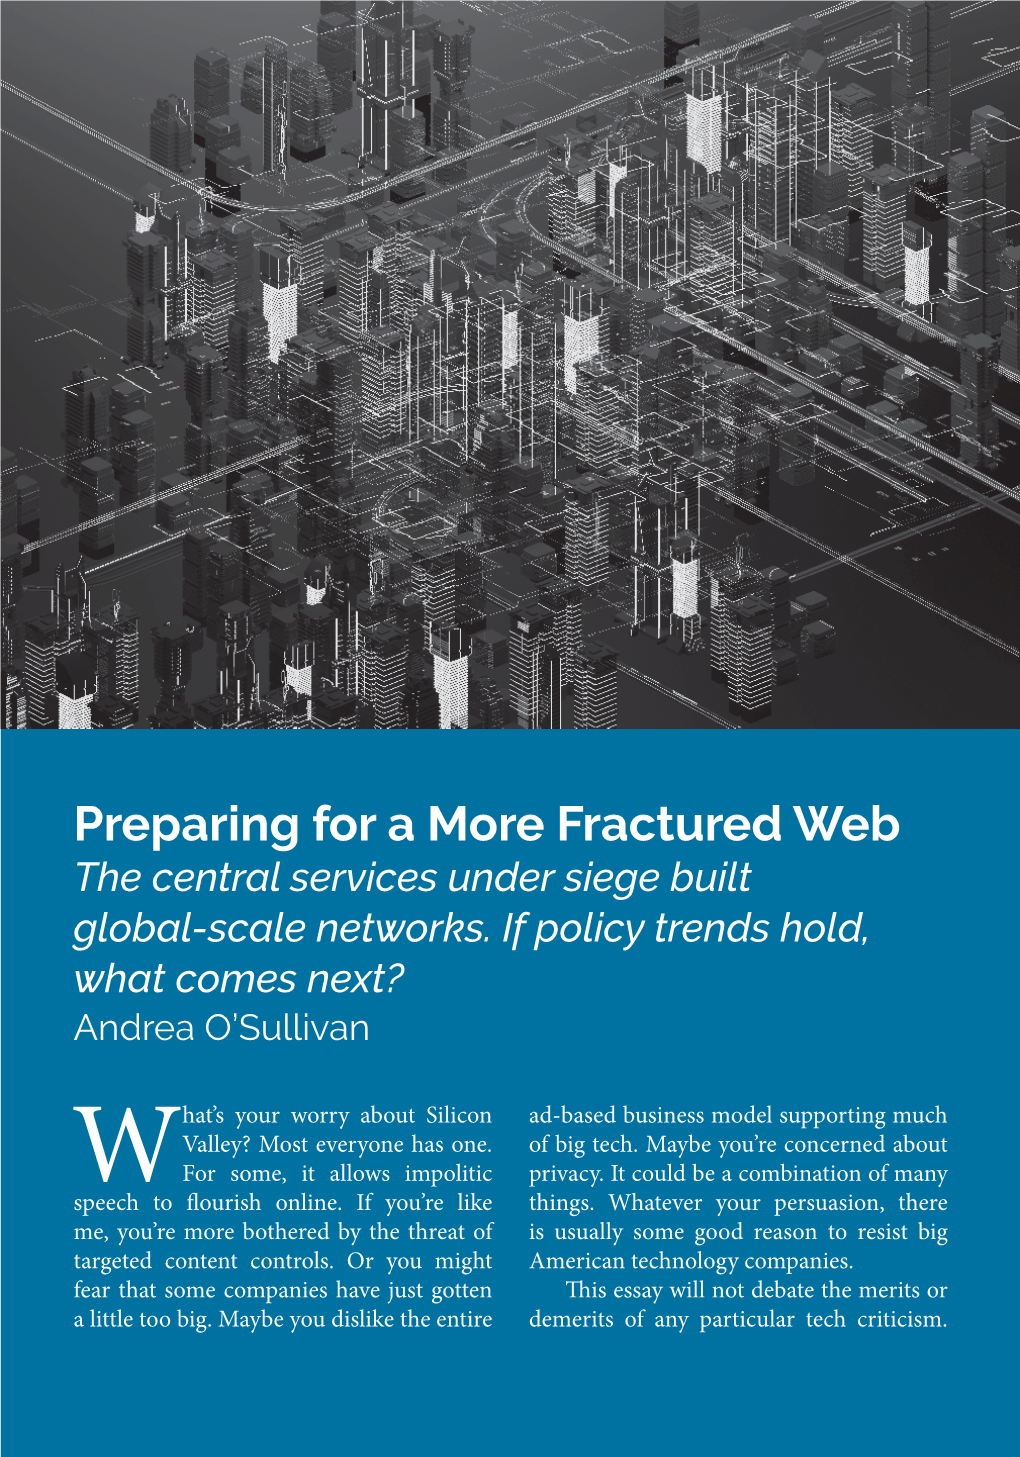 Preparing for a More Fractured Web the Central Services Under Siege Built Global-Scale Networks